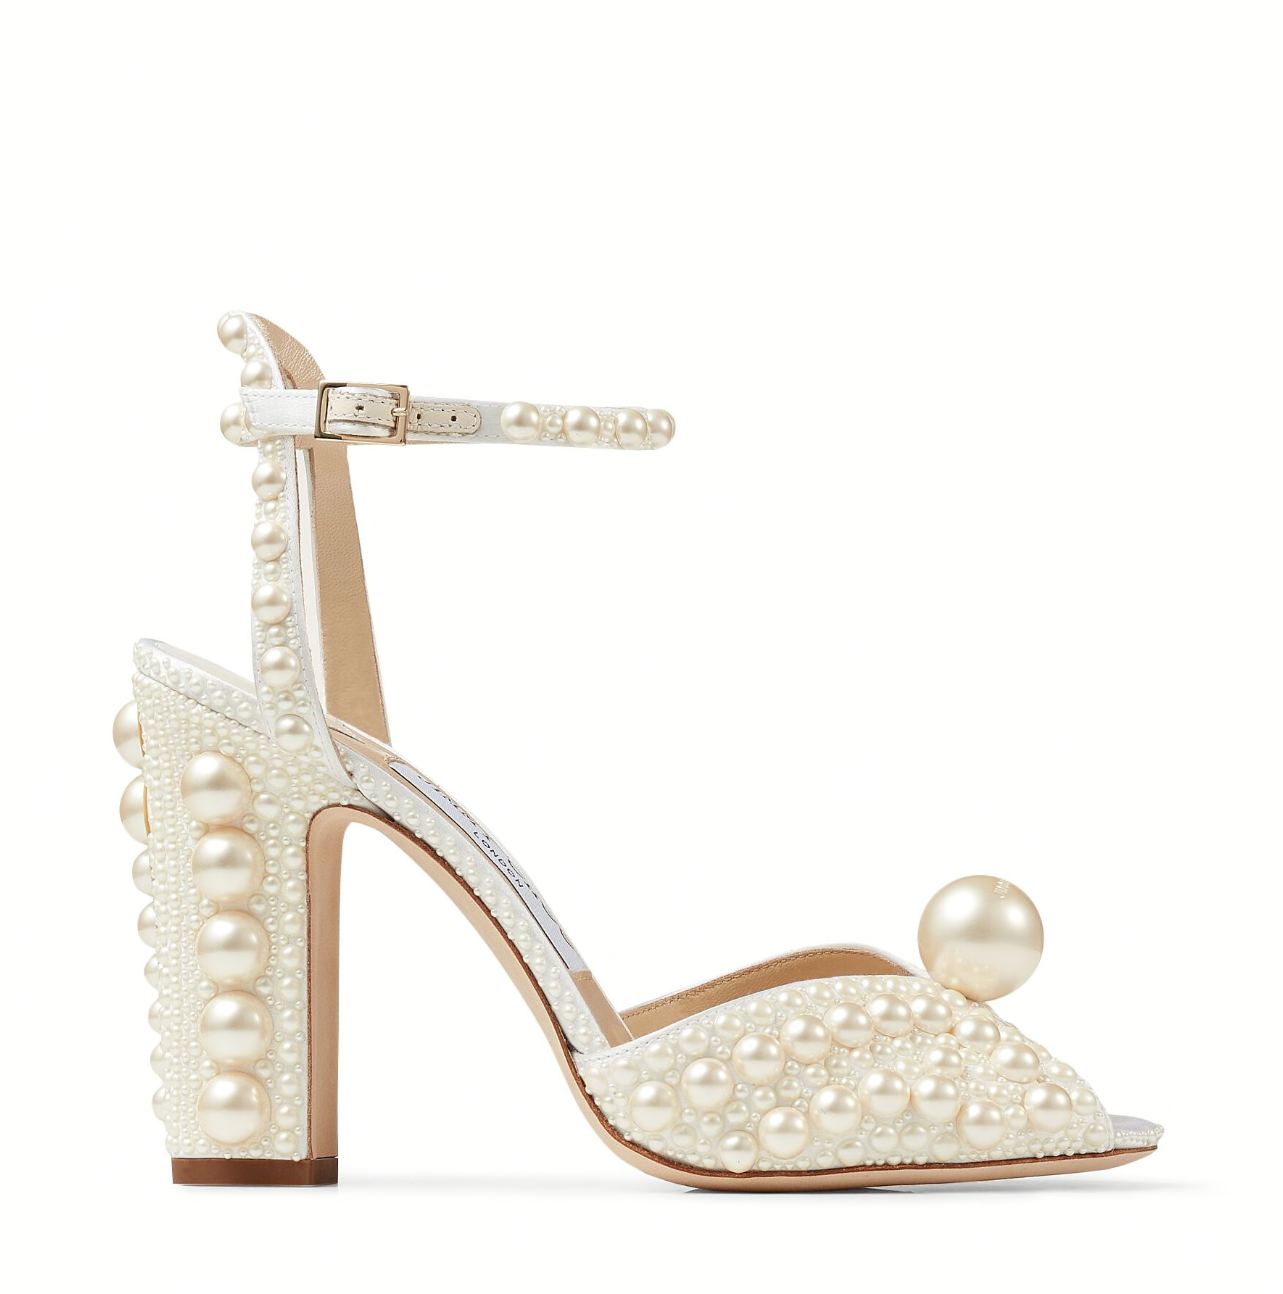 Weddings: 5 bridal shoe collections to know this summer